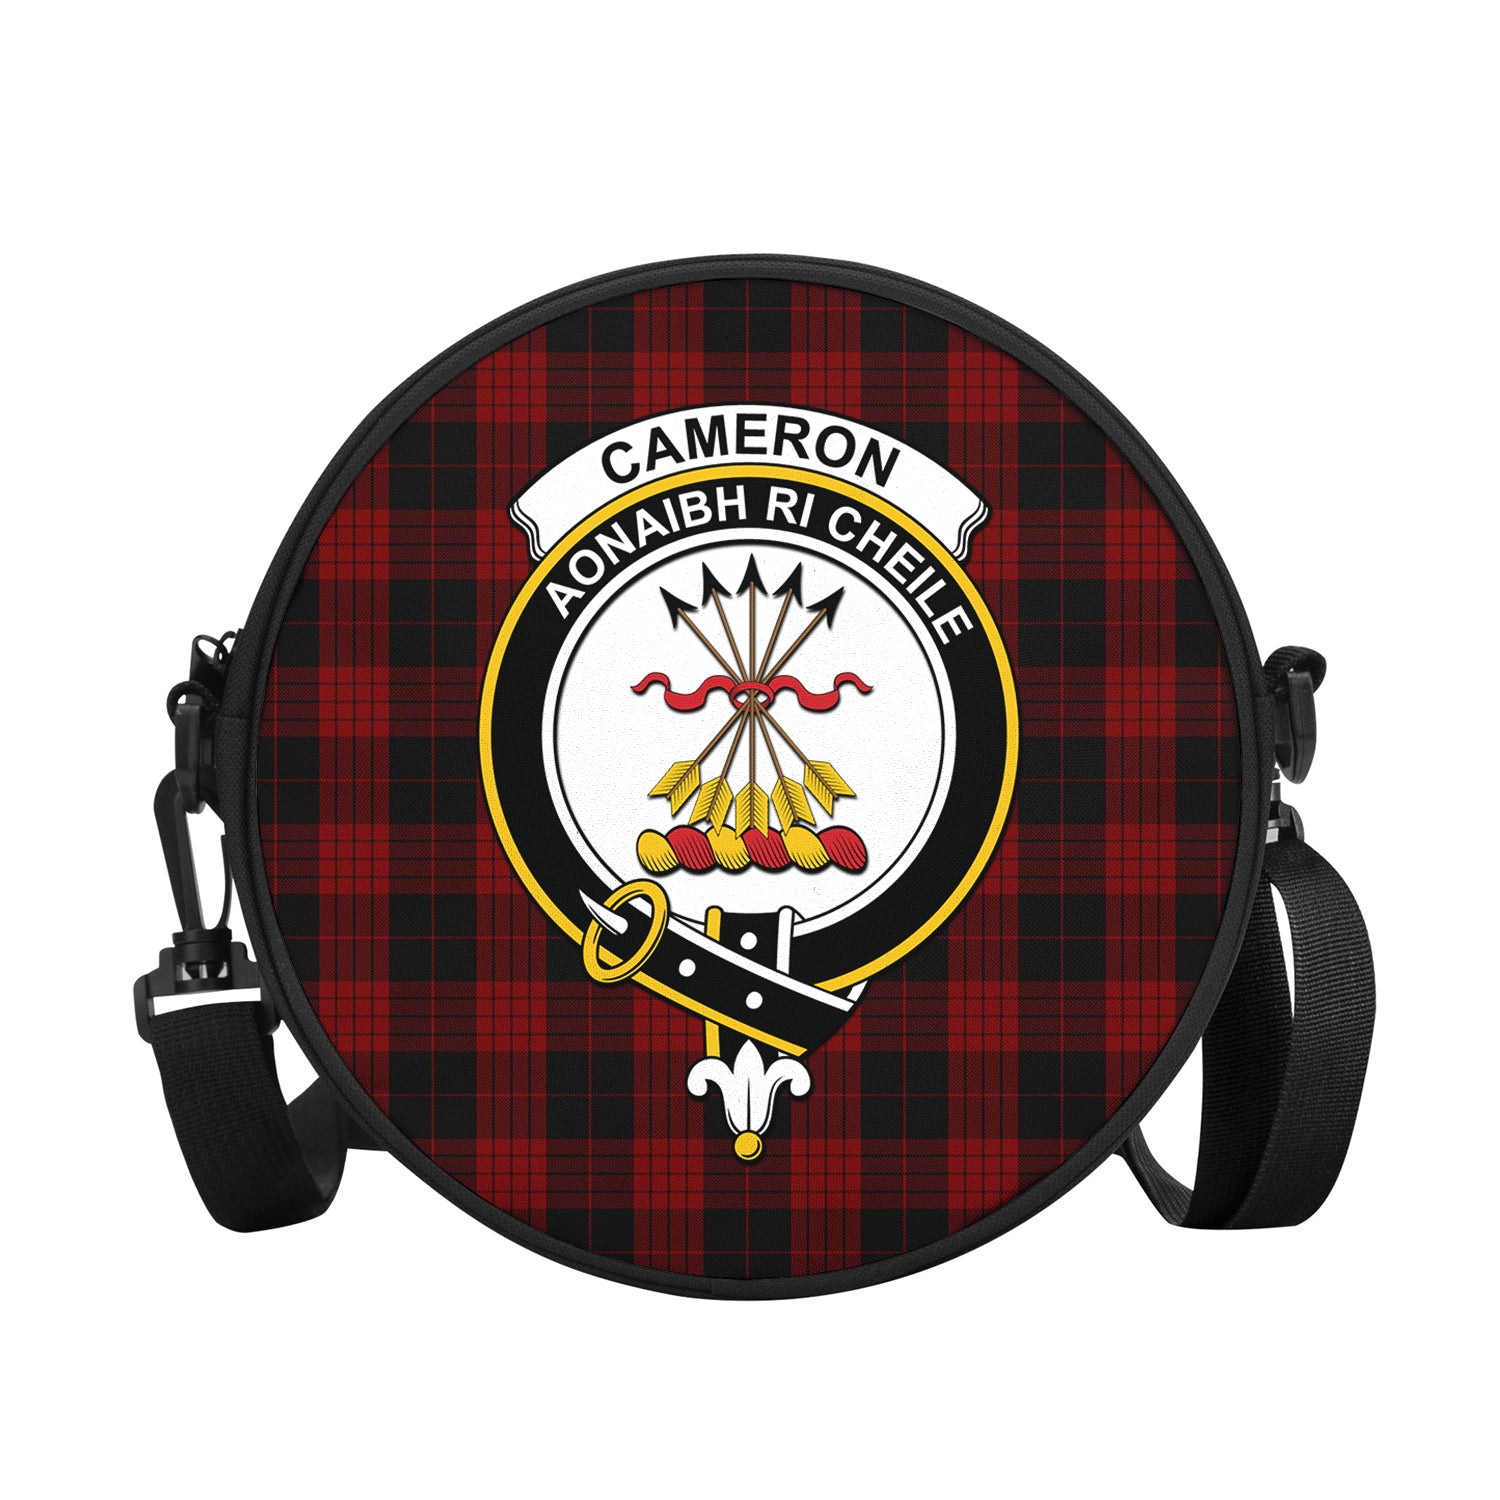 cameron-black-and-red-tartan-round-satchel-bags-with-family-crest